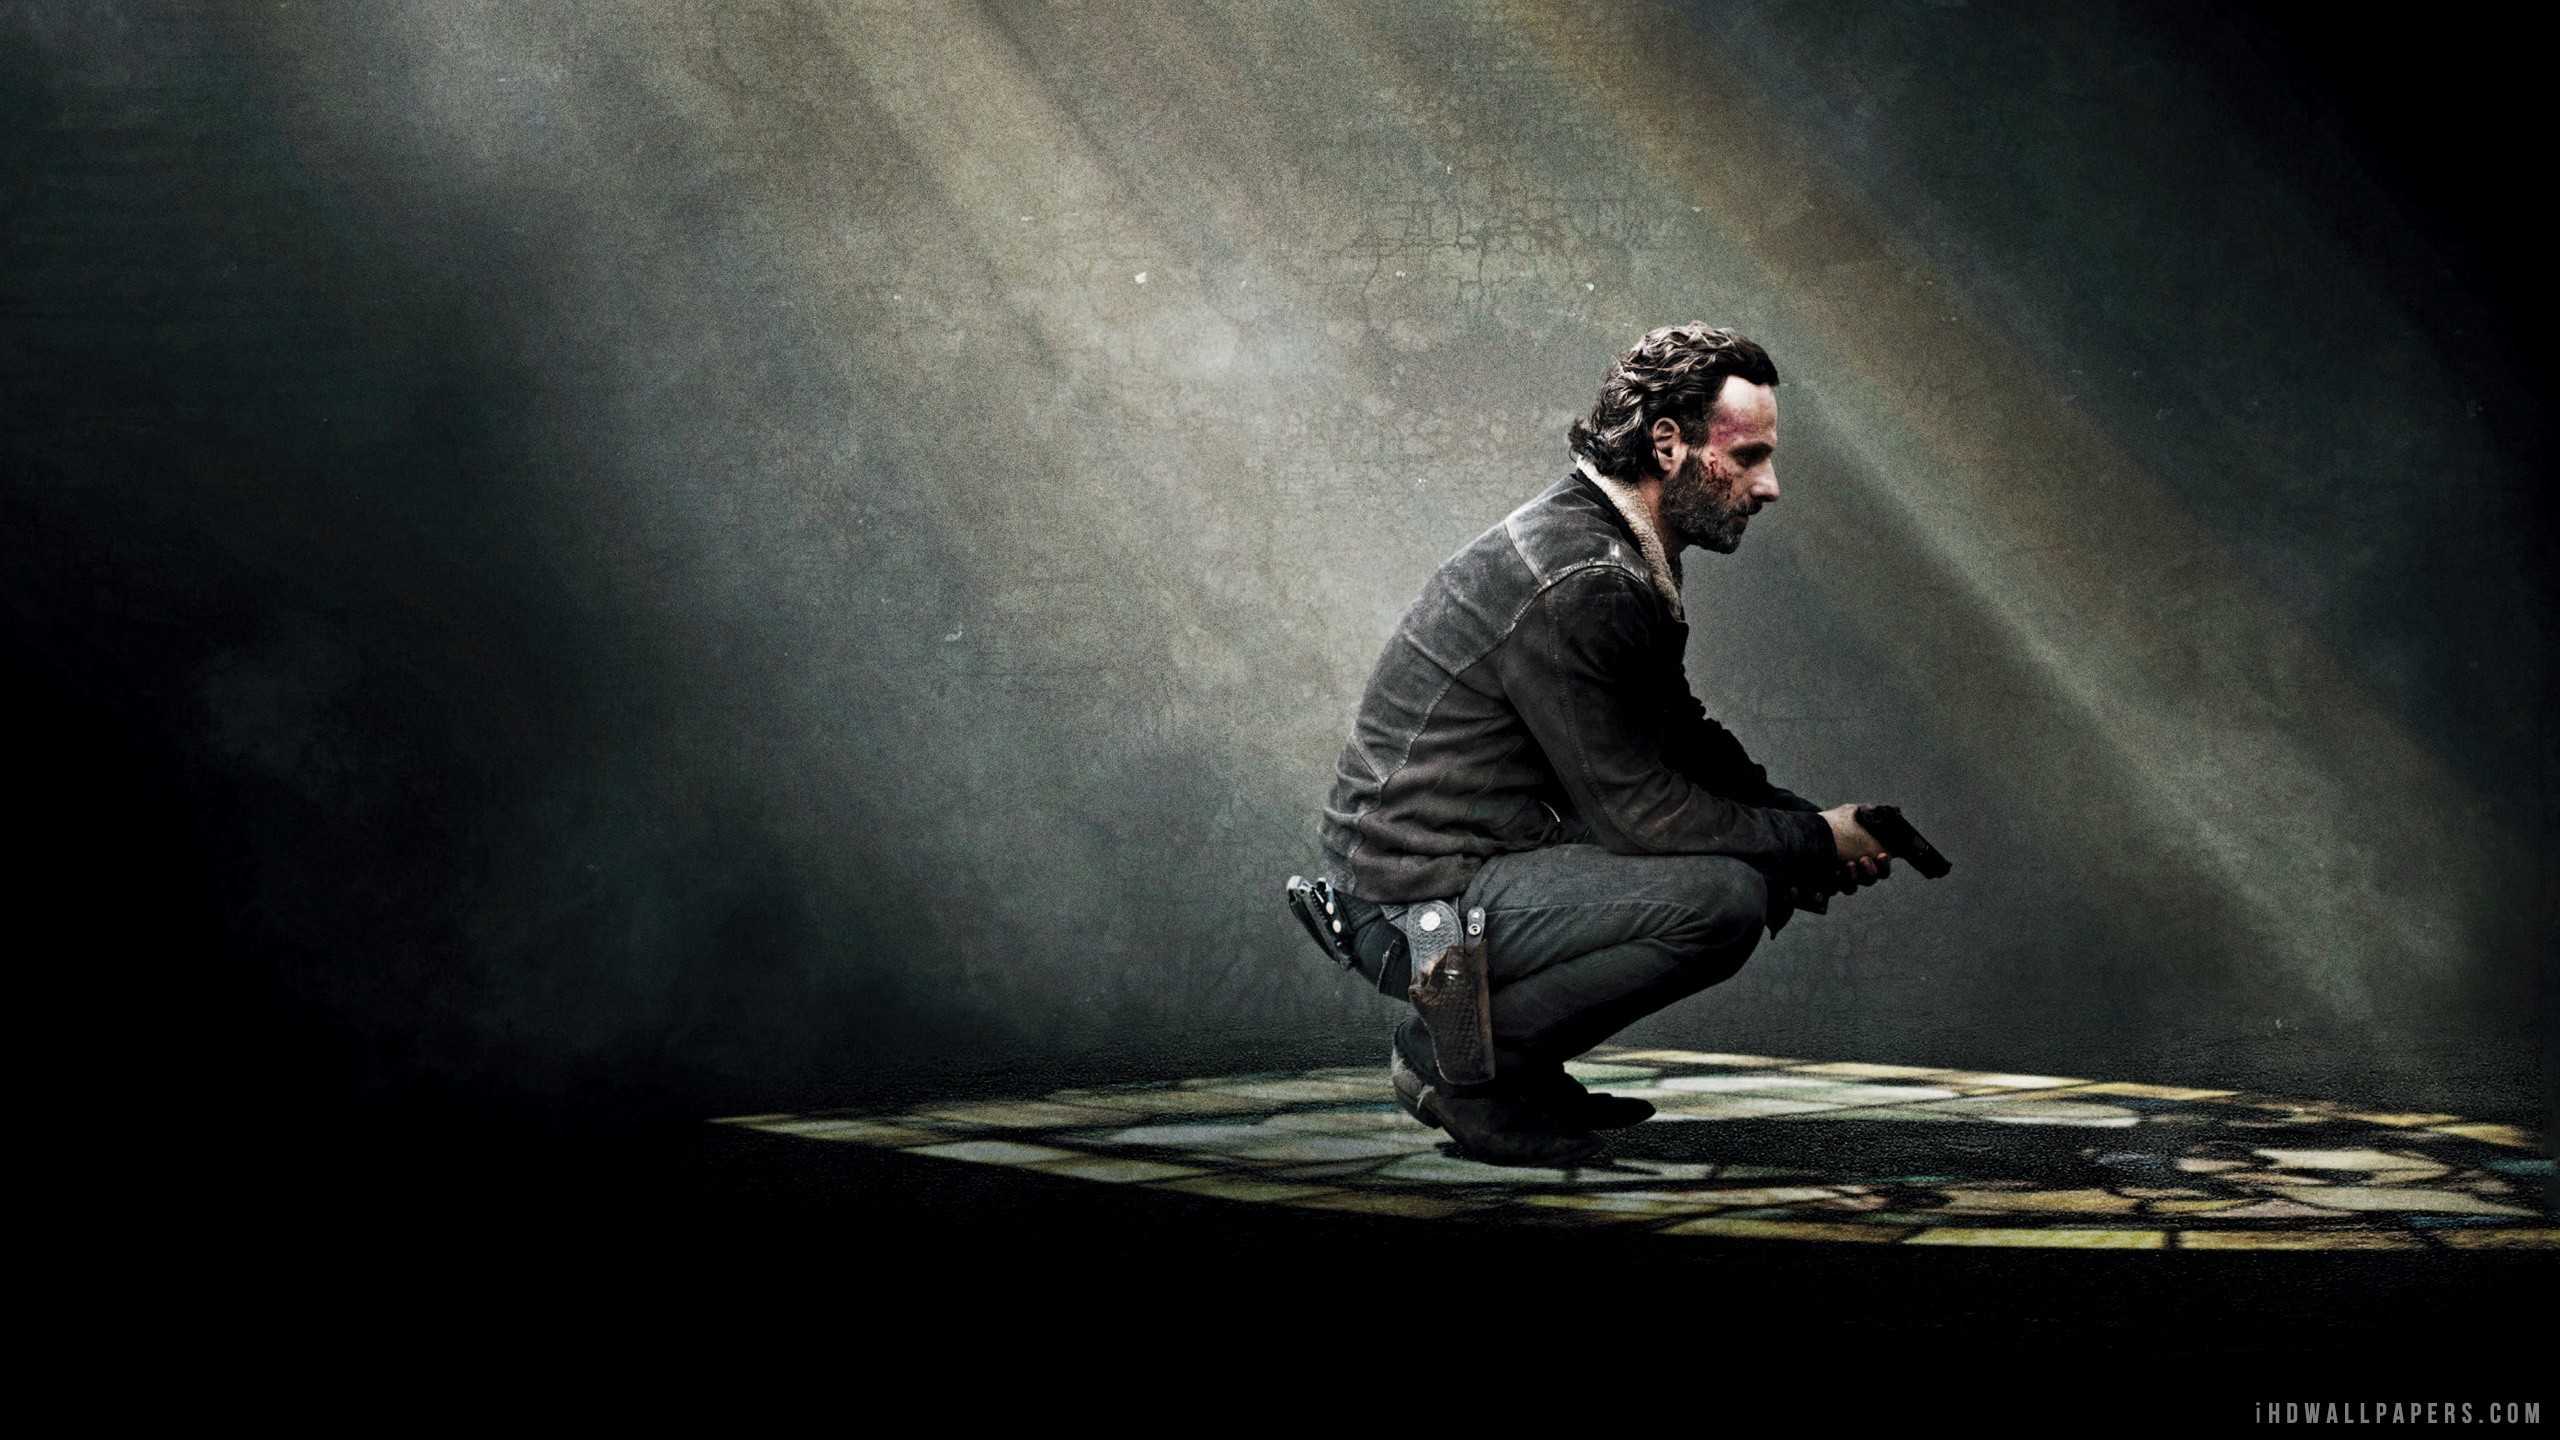 the walking dead wallpaper 1920x1080,sky,darkness,photography,flash photography,performance